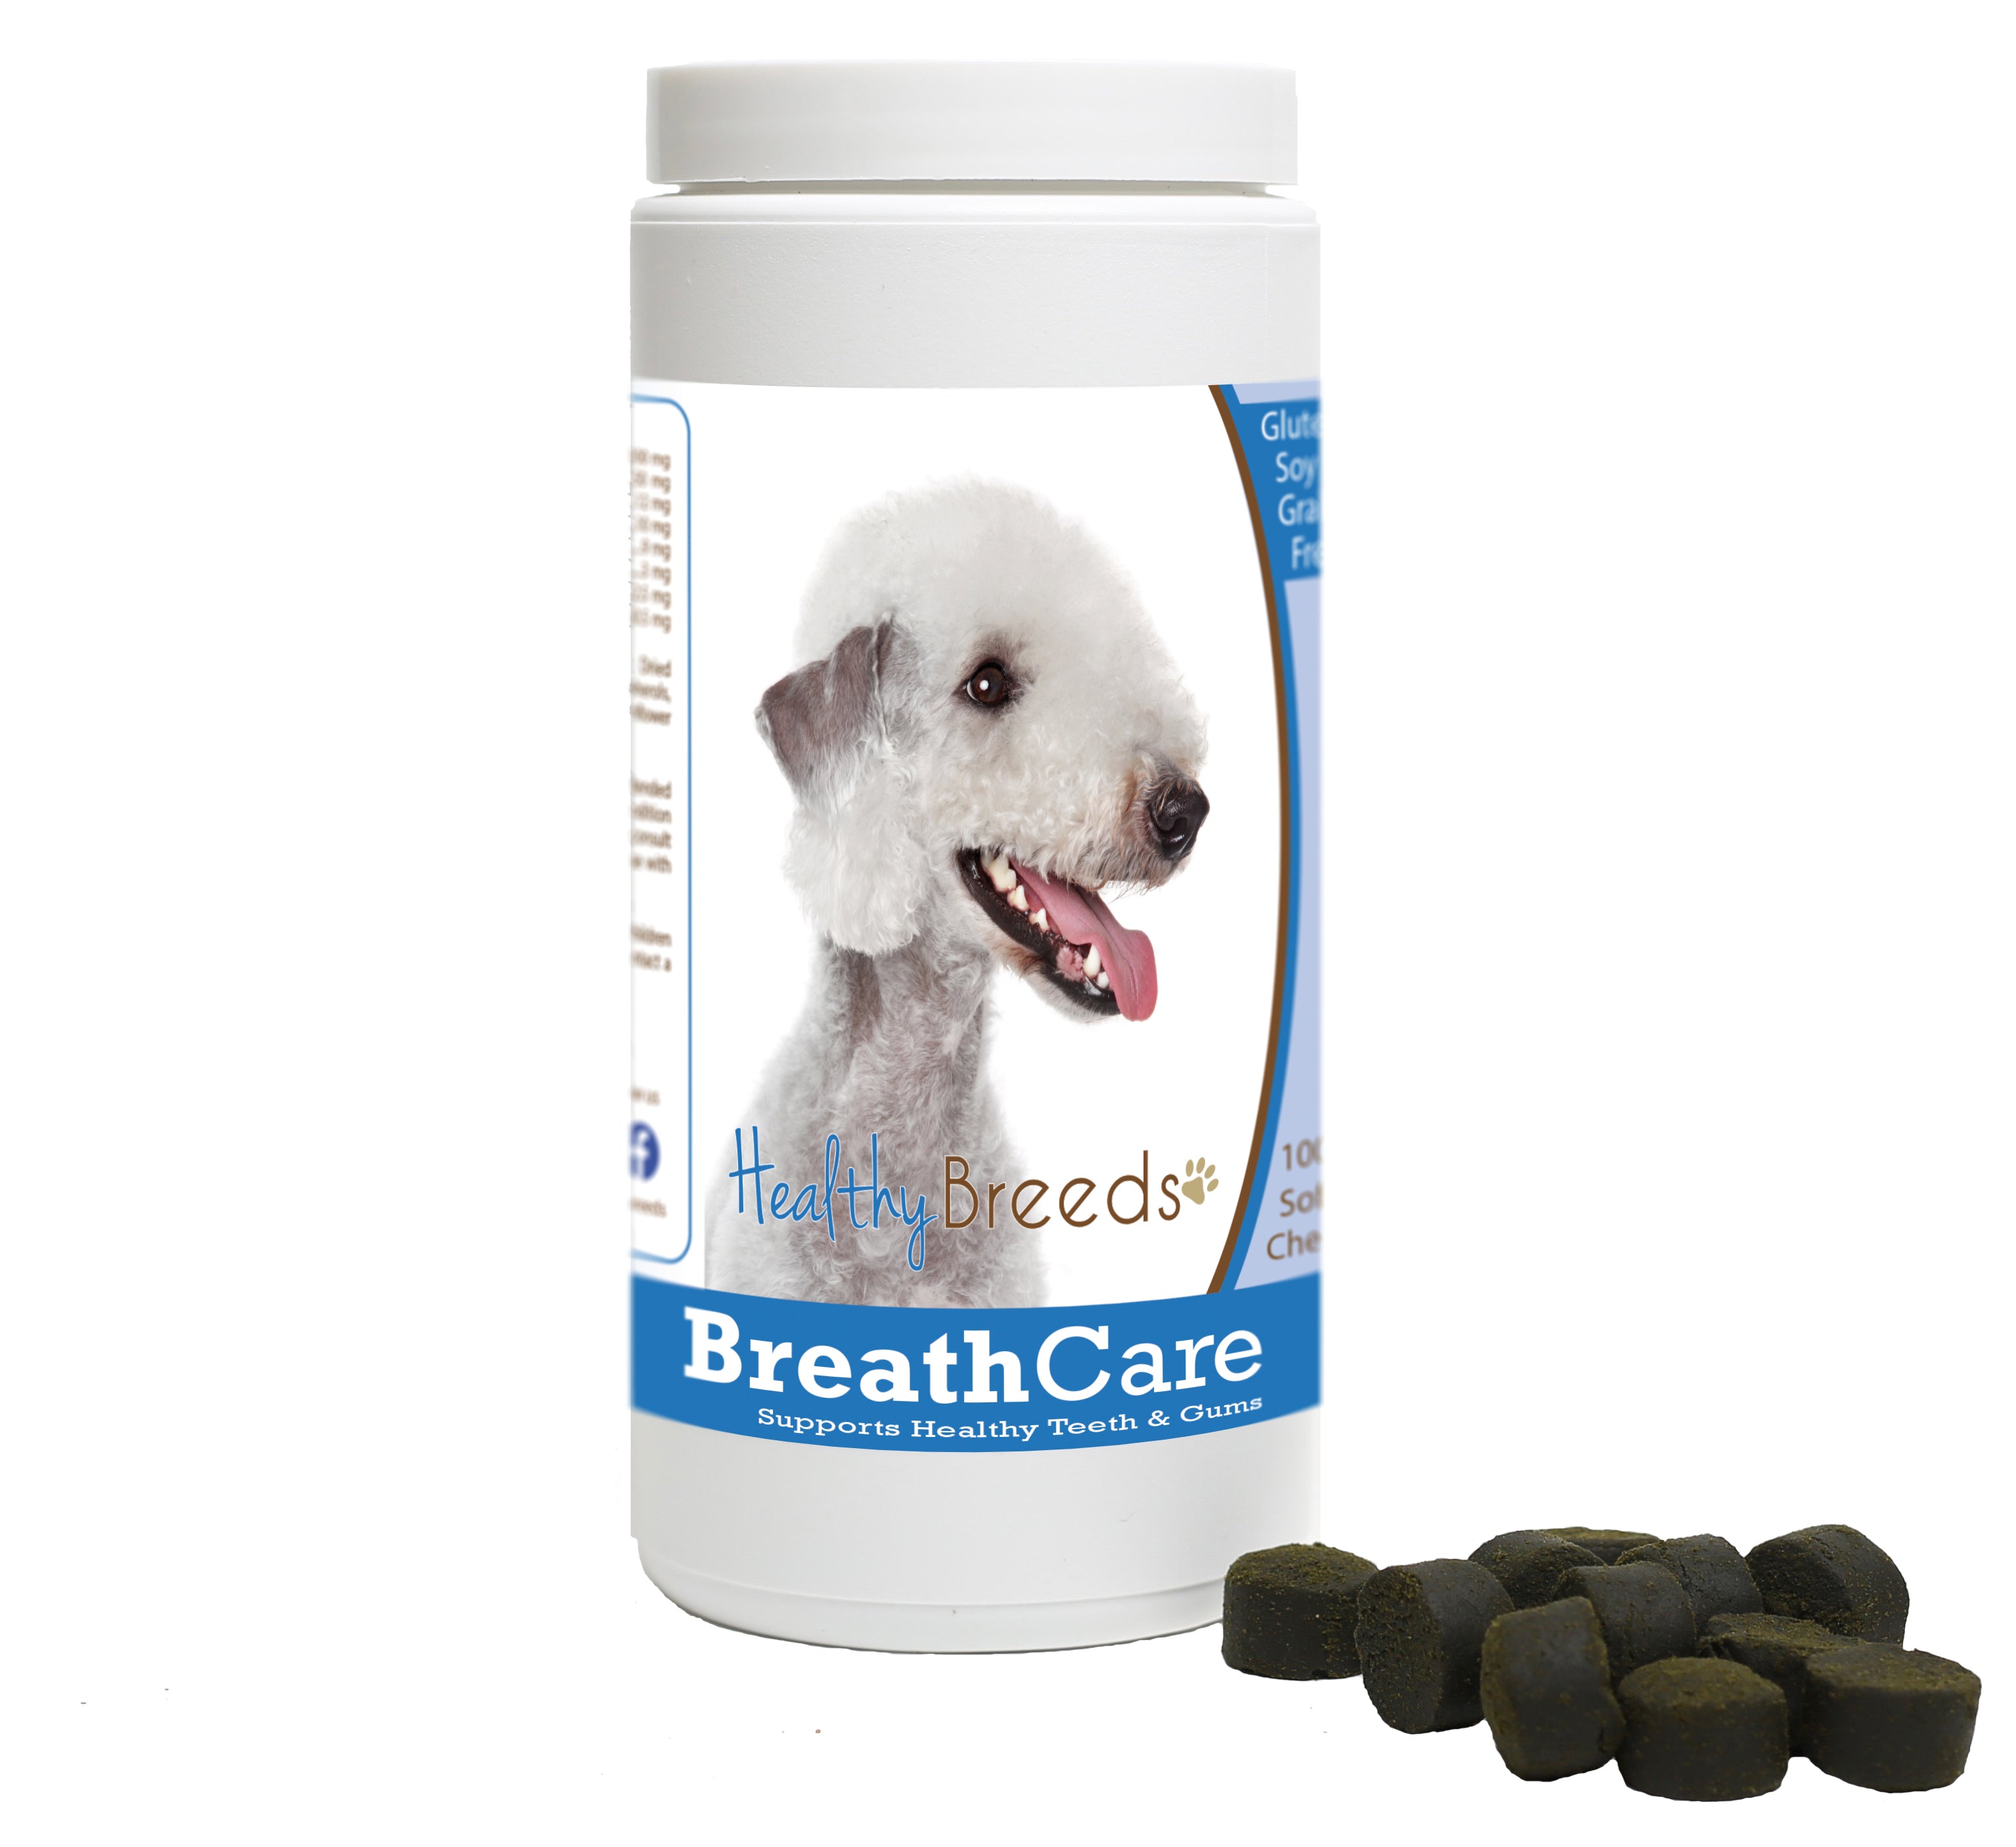 Bedlington Terrier Breath Care Soft Chews for Dogs 100 Count